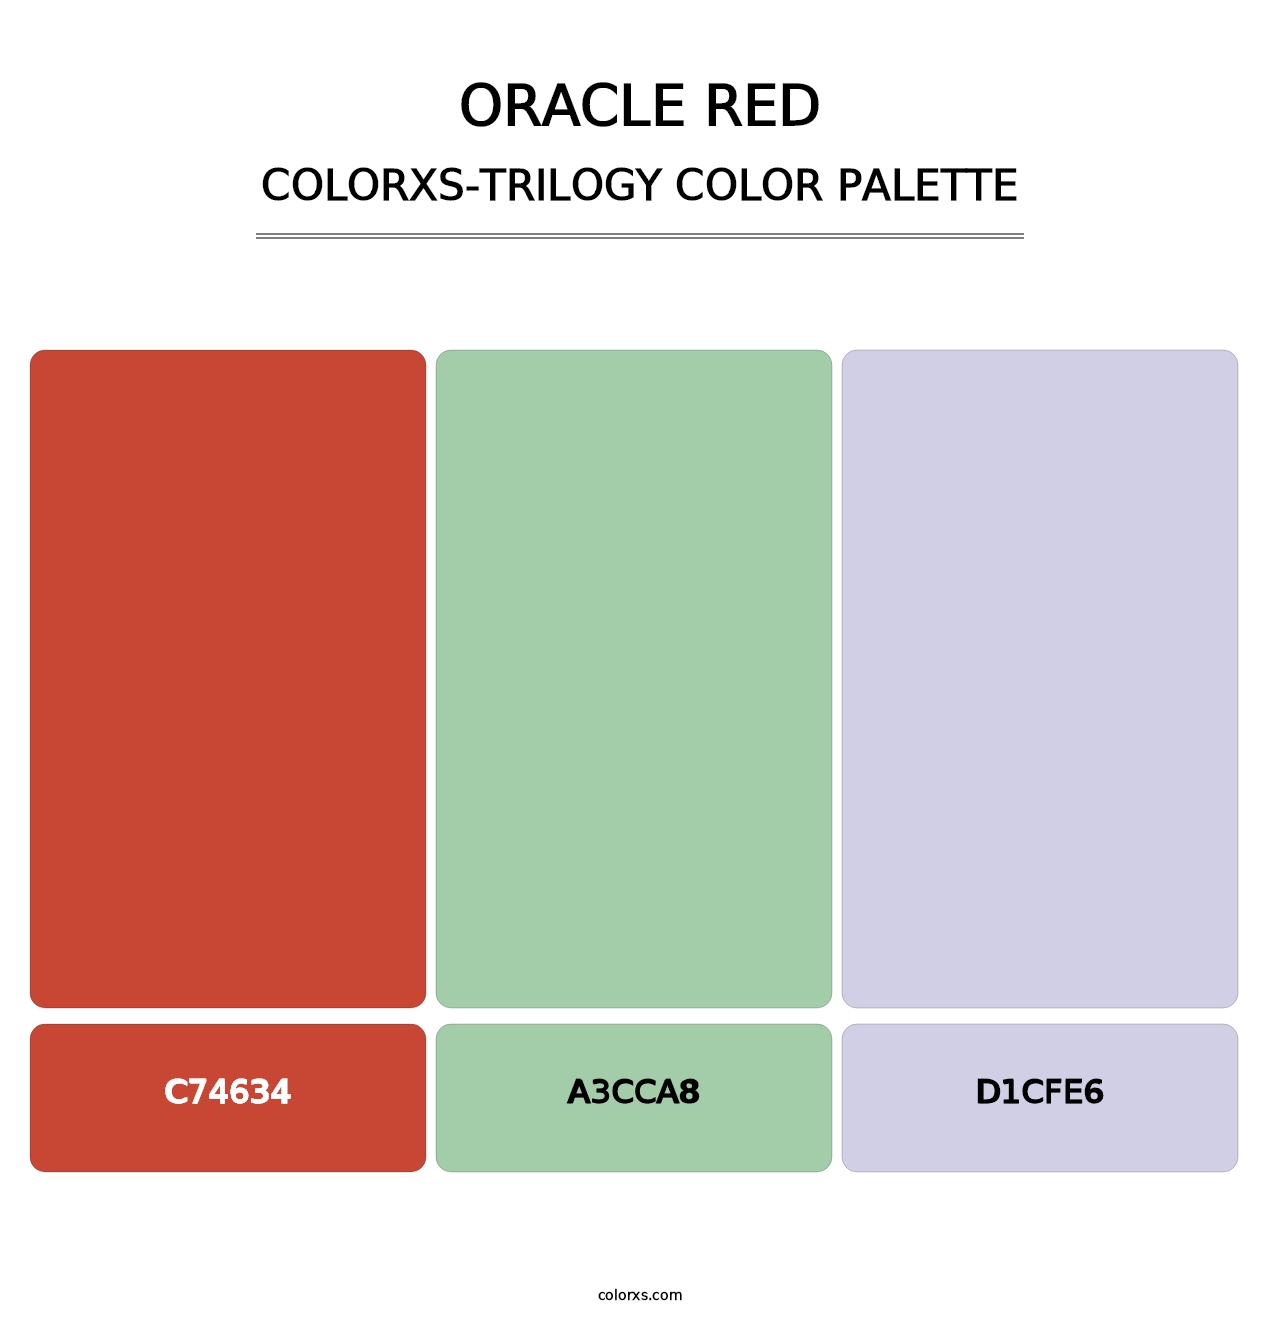 Oracle Red - Colorxs Trilogy Palette